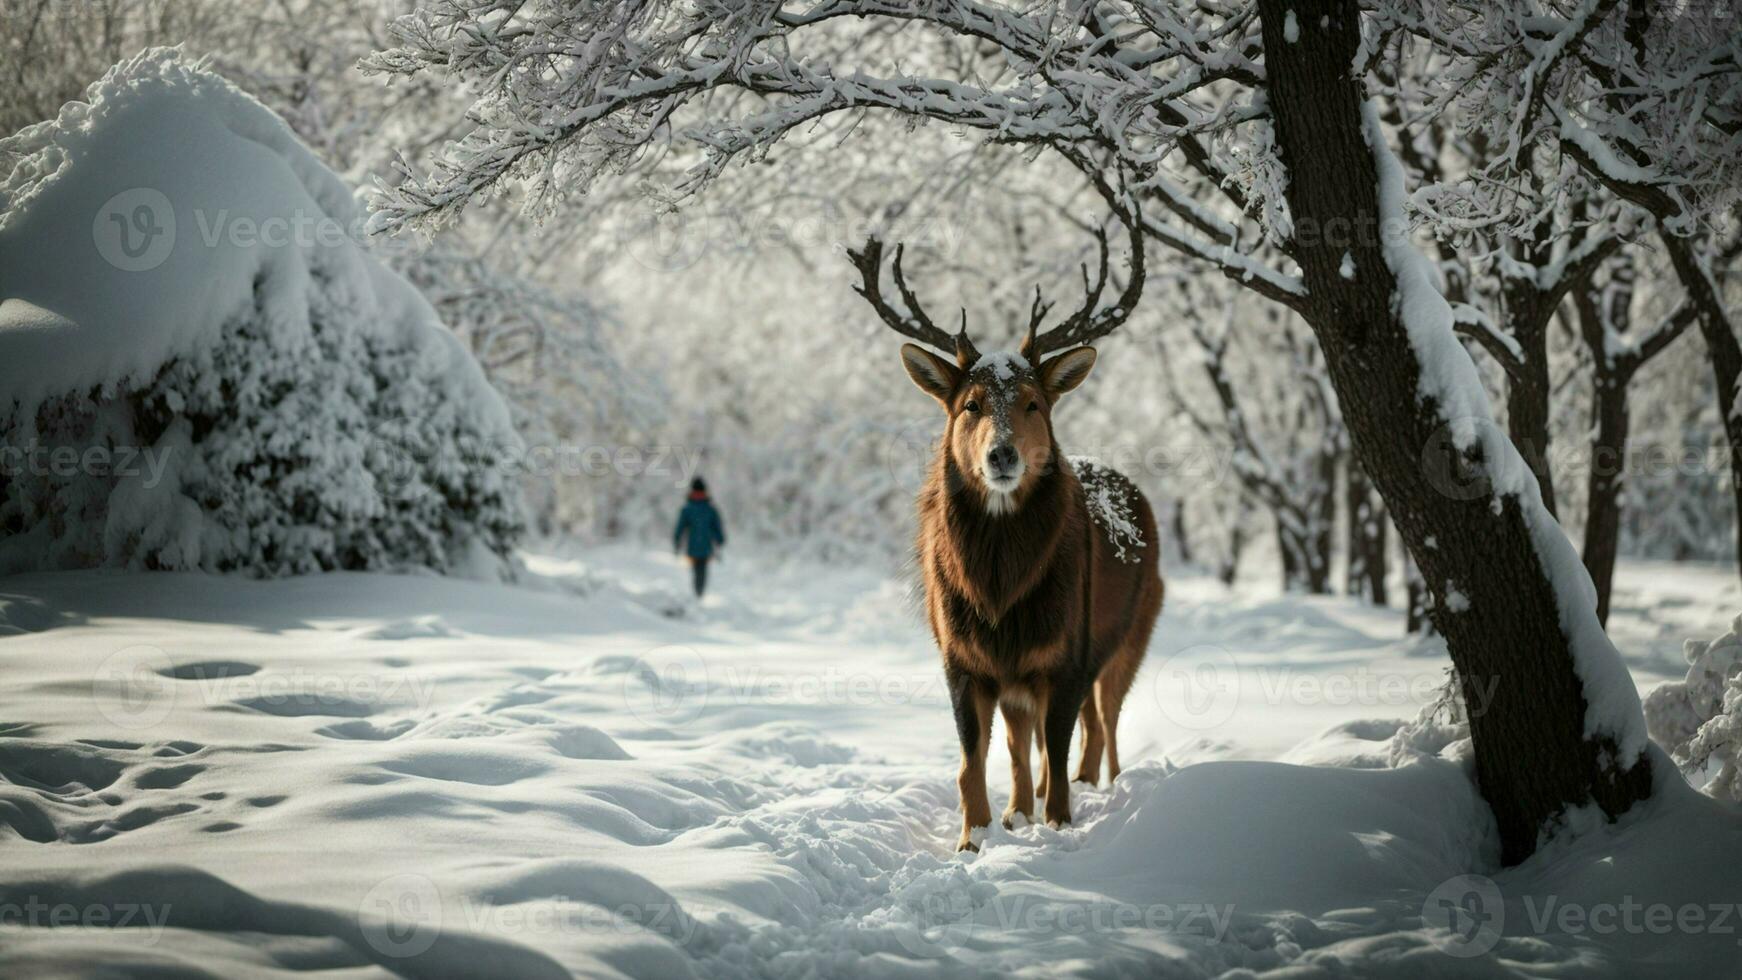 AI generated Chronicle the journey of a solitary animal navigating the labyrinth of snow-laden branches in search of sustenance. photo